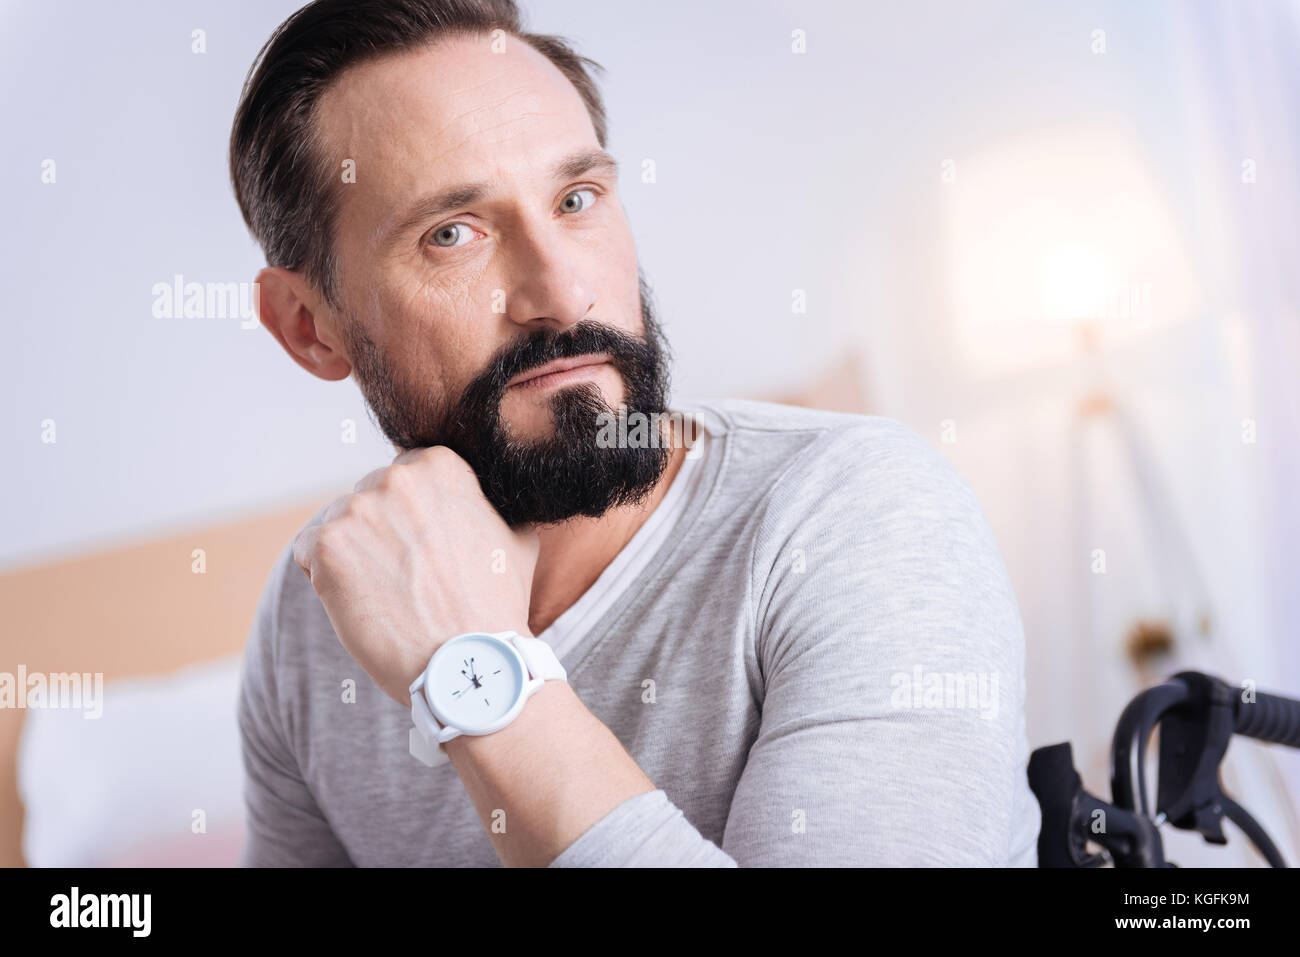 Handsome serious paralyzed man thinking Stock Photo